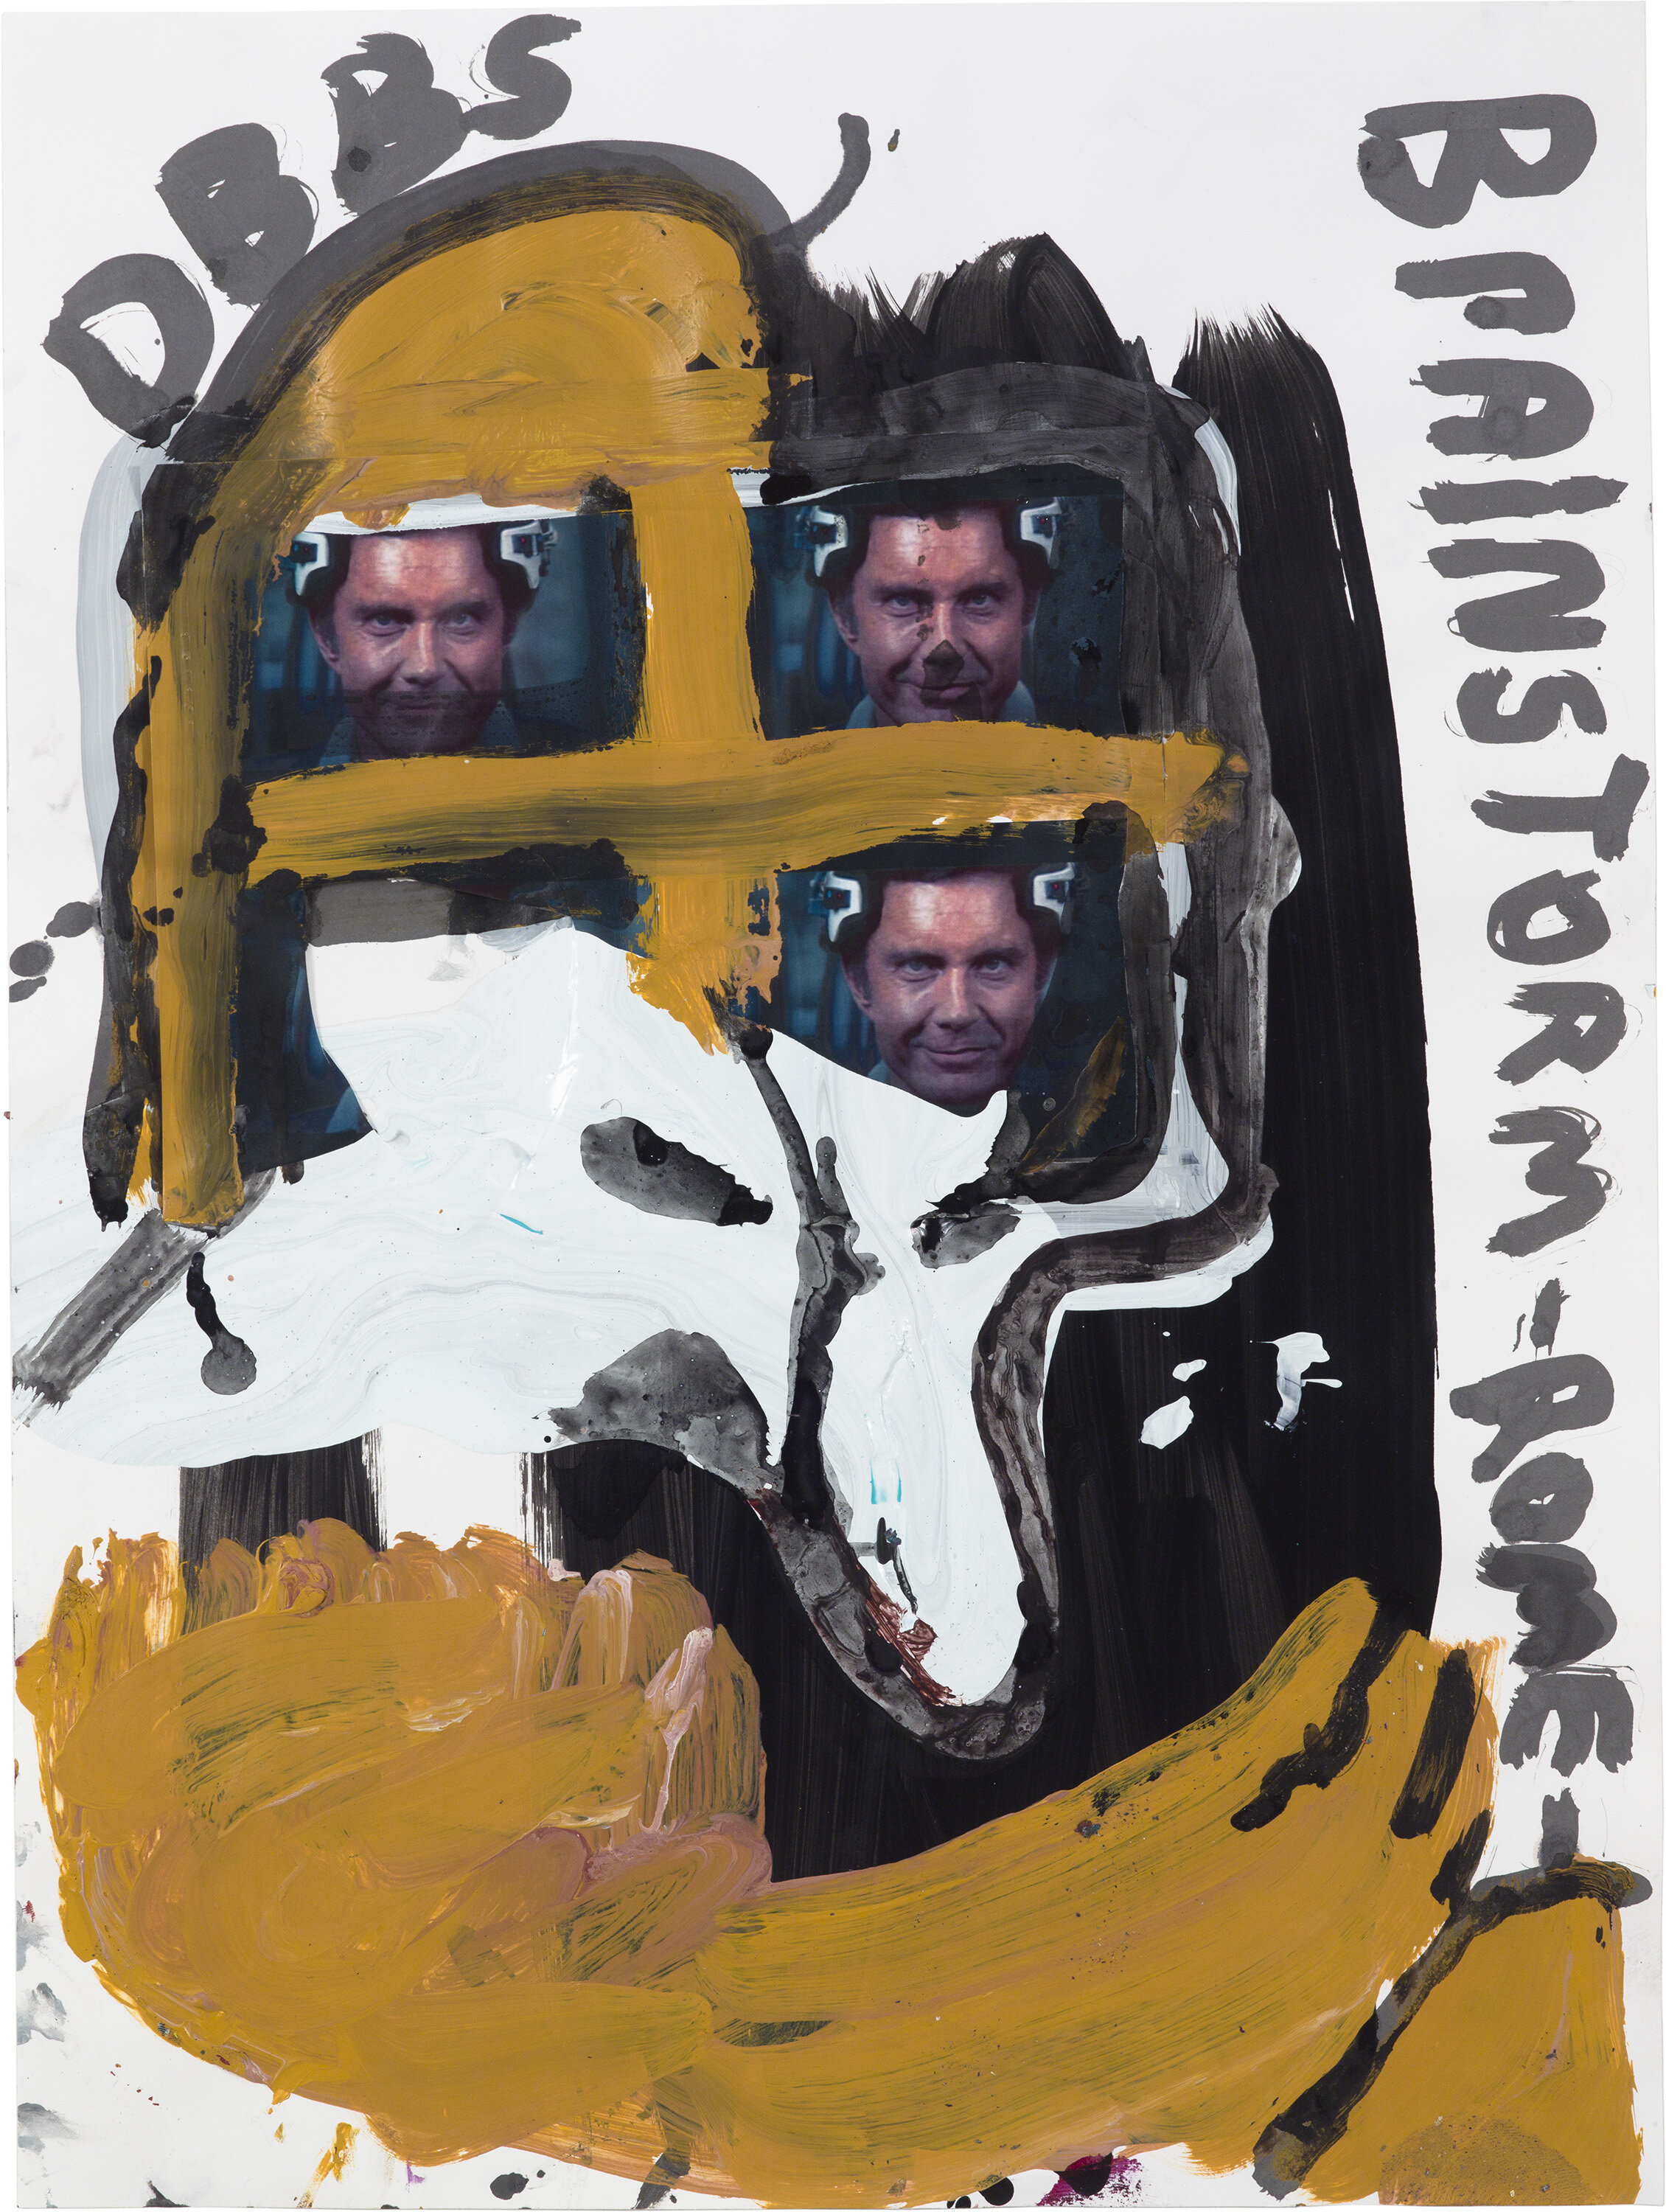  Drew Beattie and Ben Shepard   DBBS-DRW-2019-373   2019  acrylic and collage on paper  24 x 18 inches 